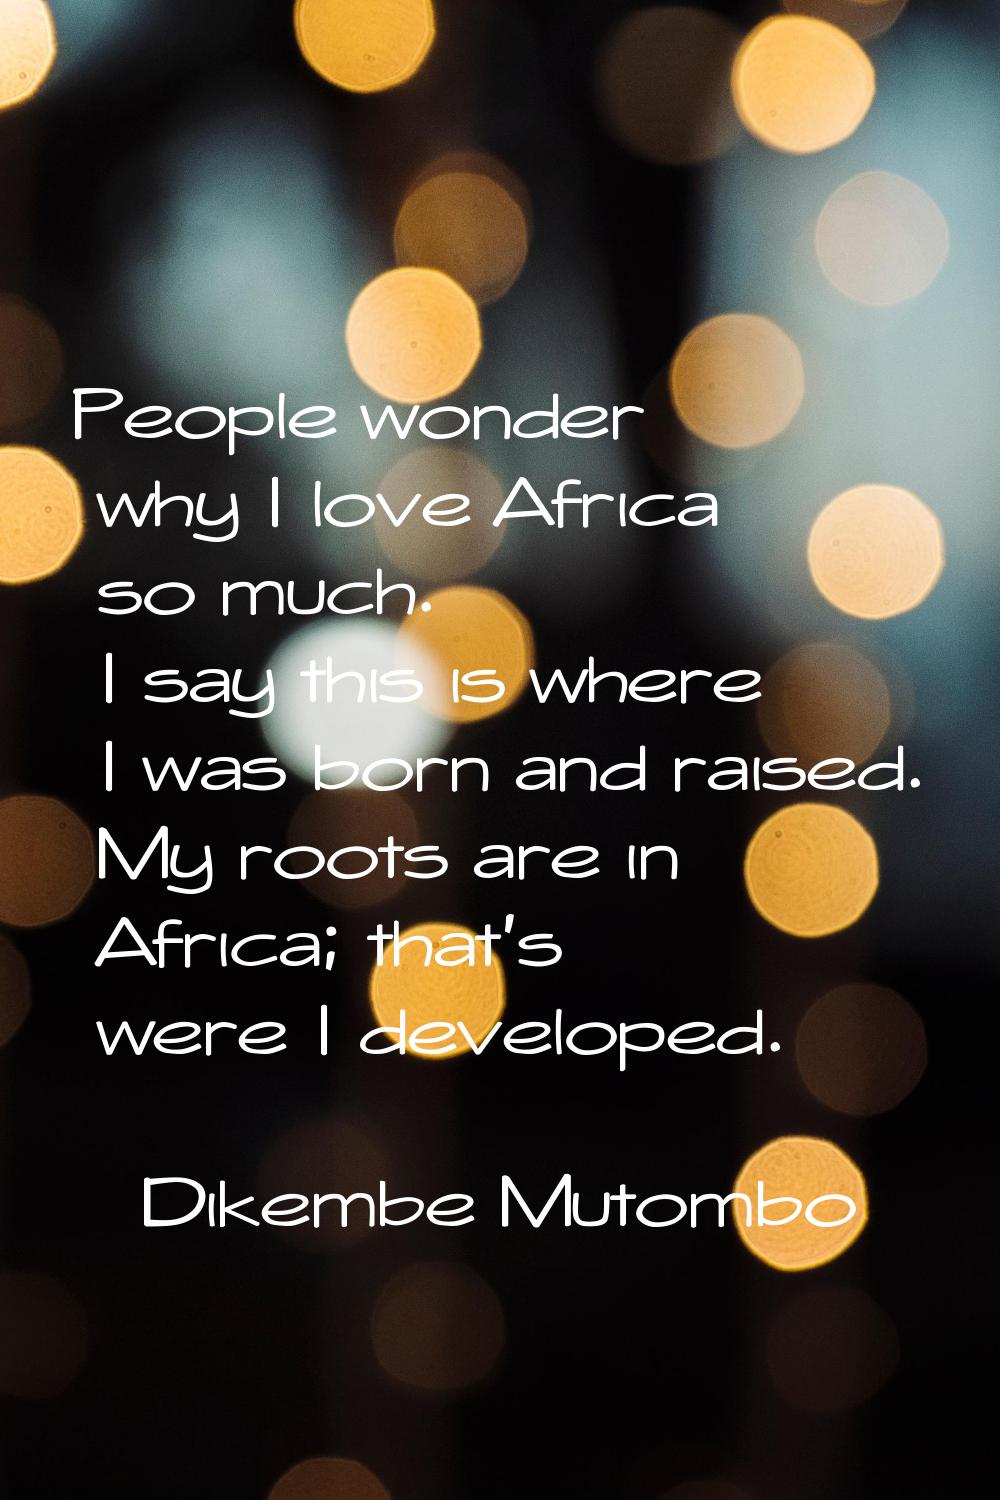 People wonder why I love Africa so much. I say this is where I was born and raised. My roots are in